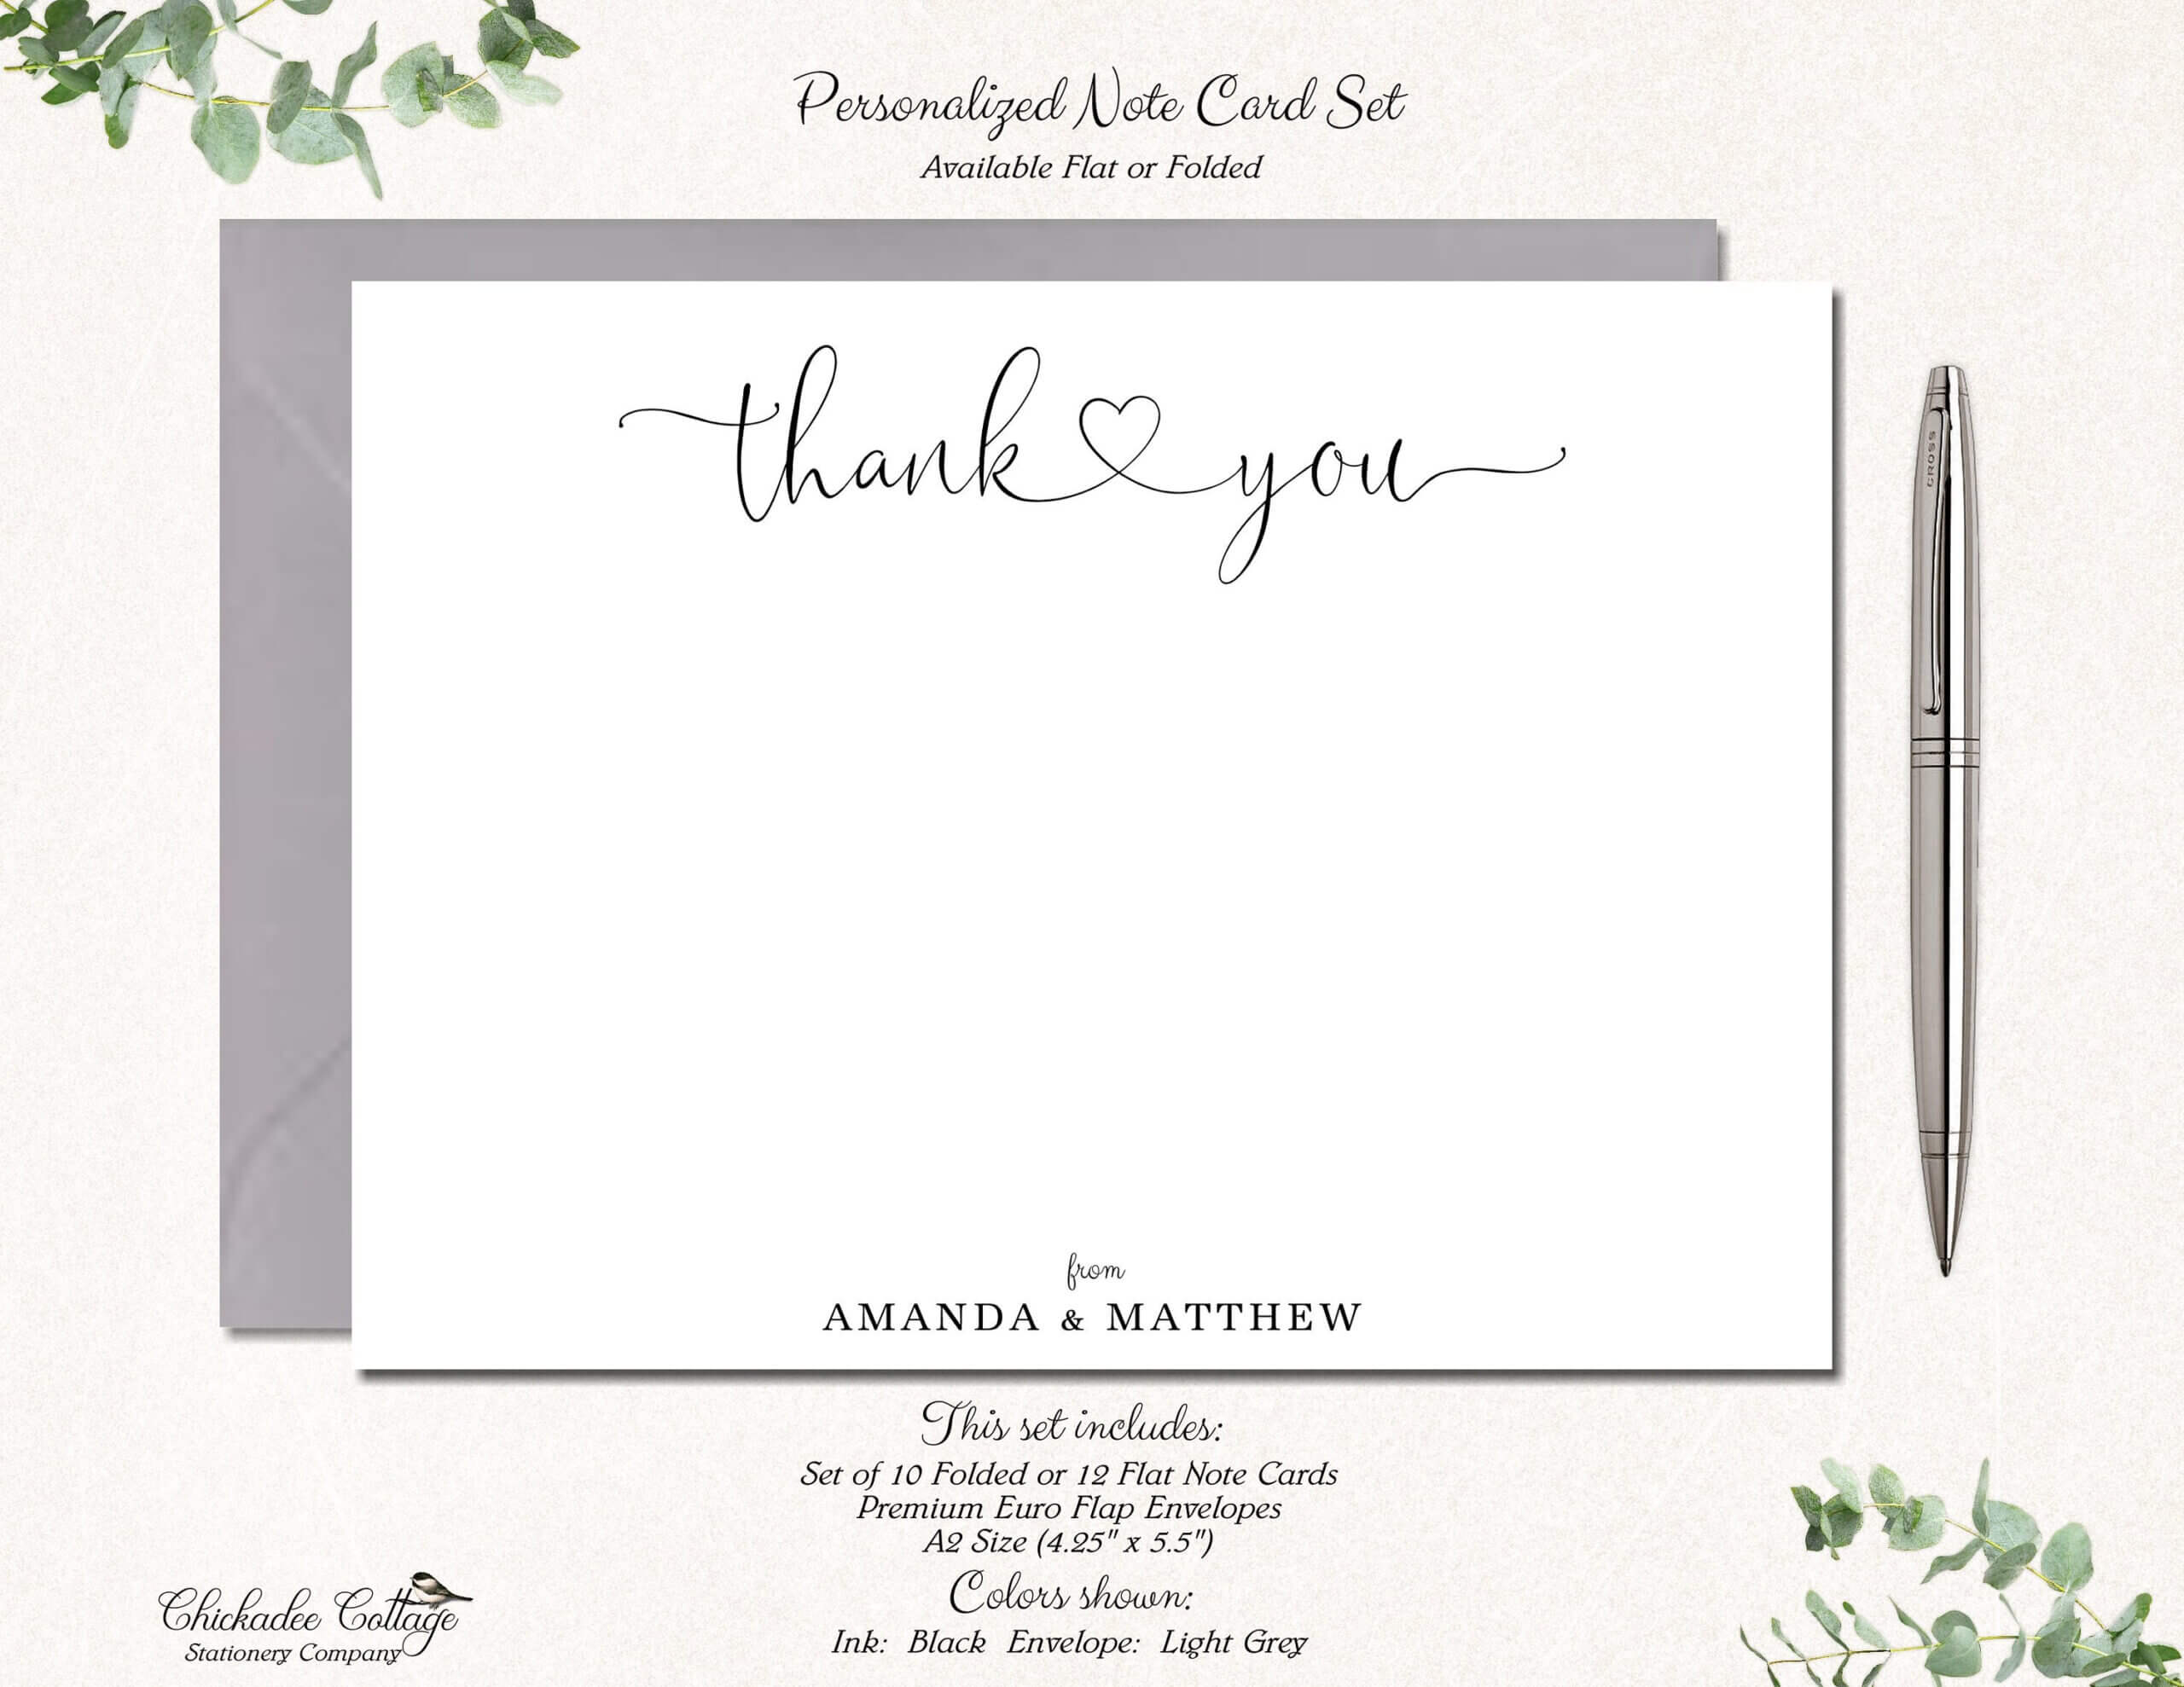 008 Template Ideas Il Fullxfull 1879552839 R9Yp Bridal Intended For Thank You Note Card Template